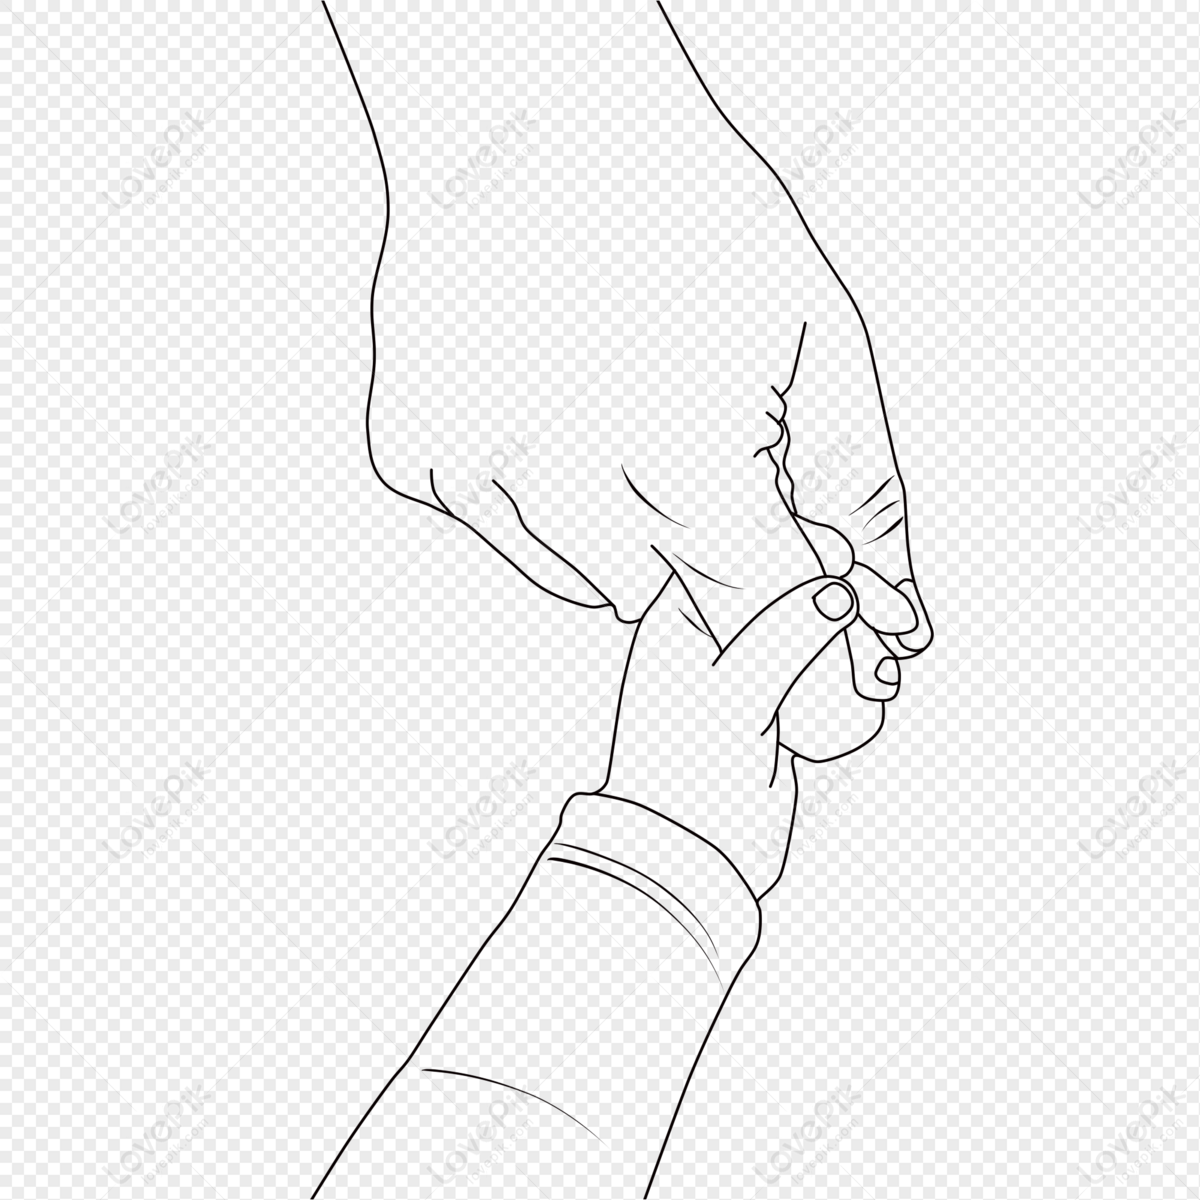 Hand Drawn Lines Big Hand Small Hand PNG Transparent Background And Clipart  Image For Free Download - Lovepik | 401747610